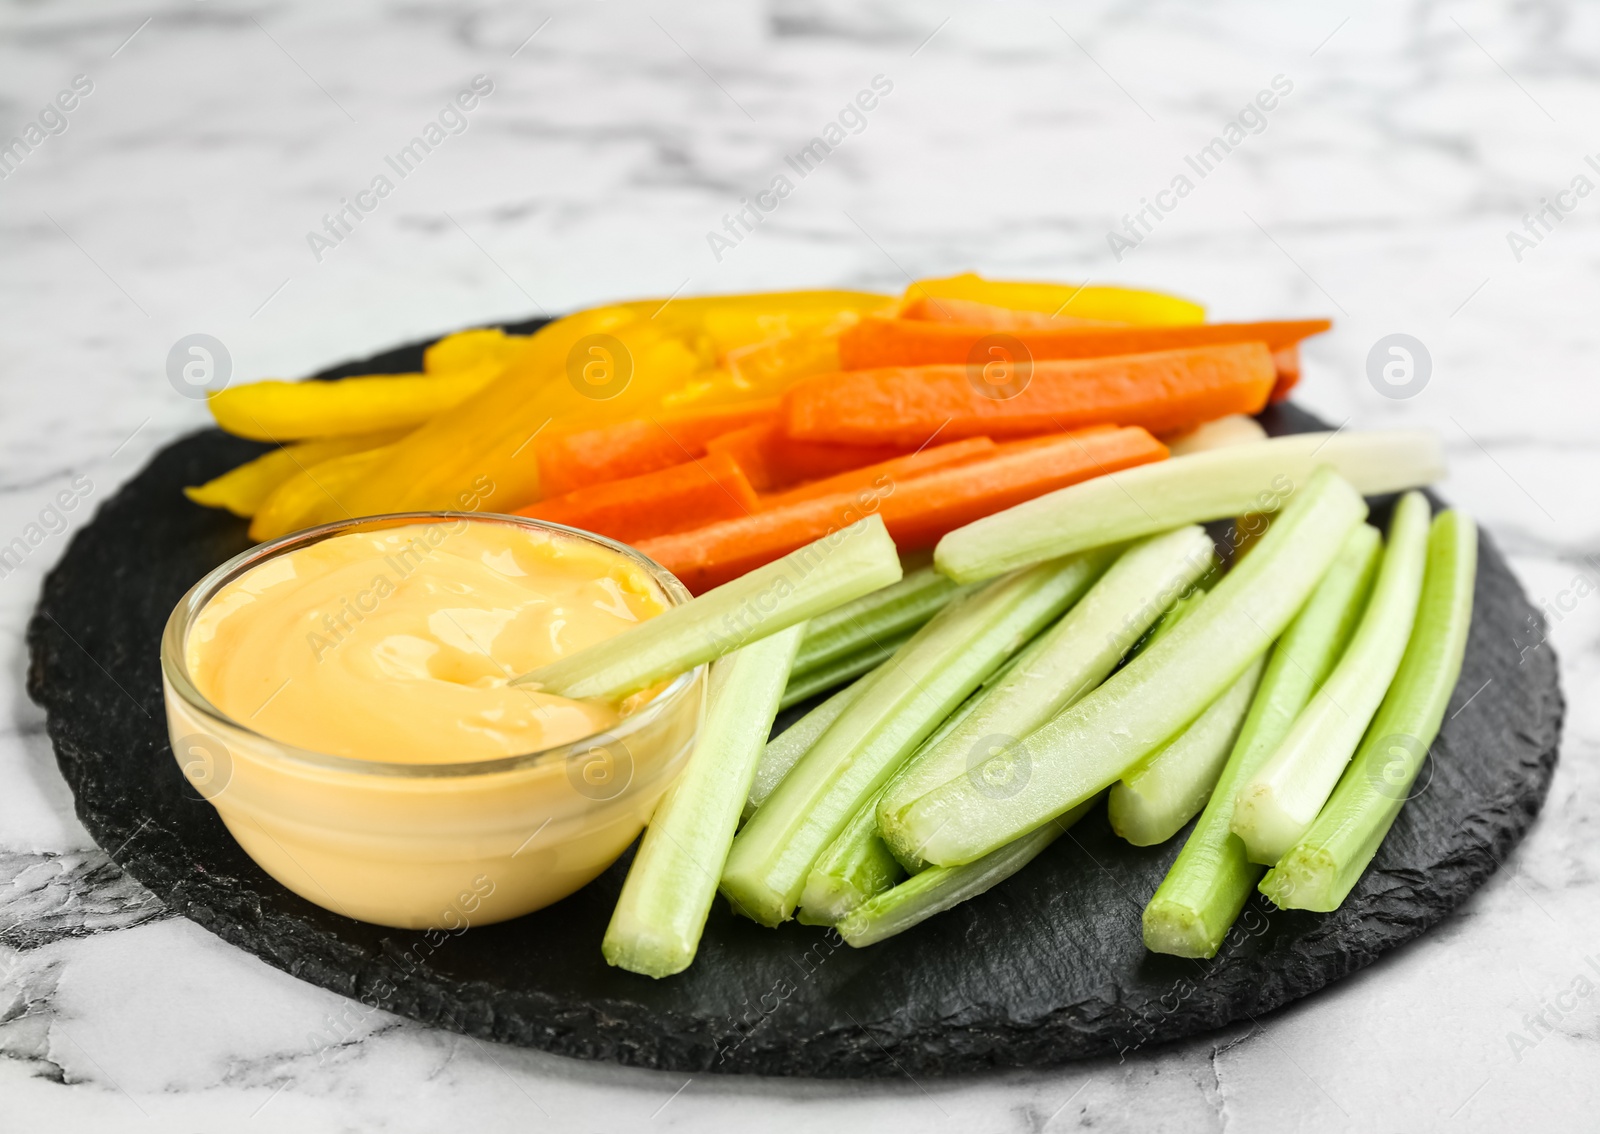 Photo of Celery and other vegetable sticks with dip sauce on white marble table